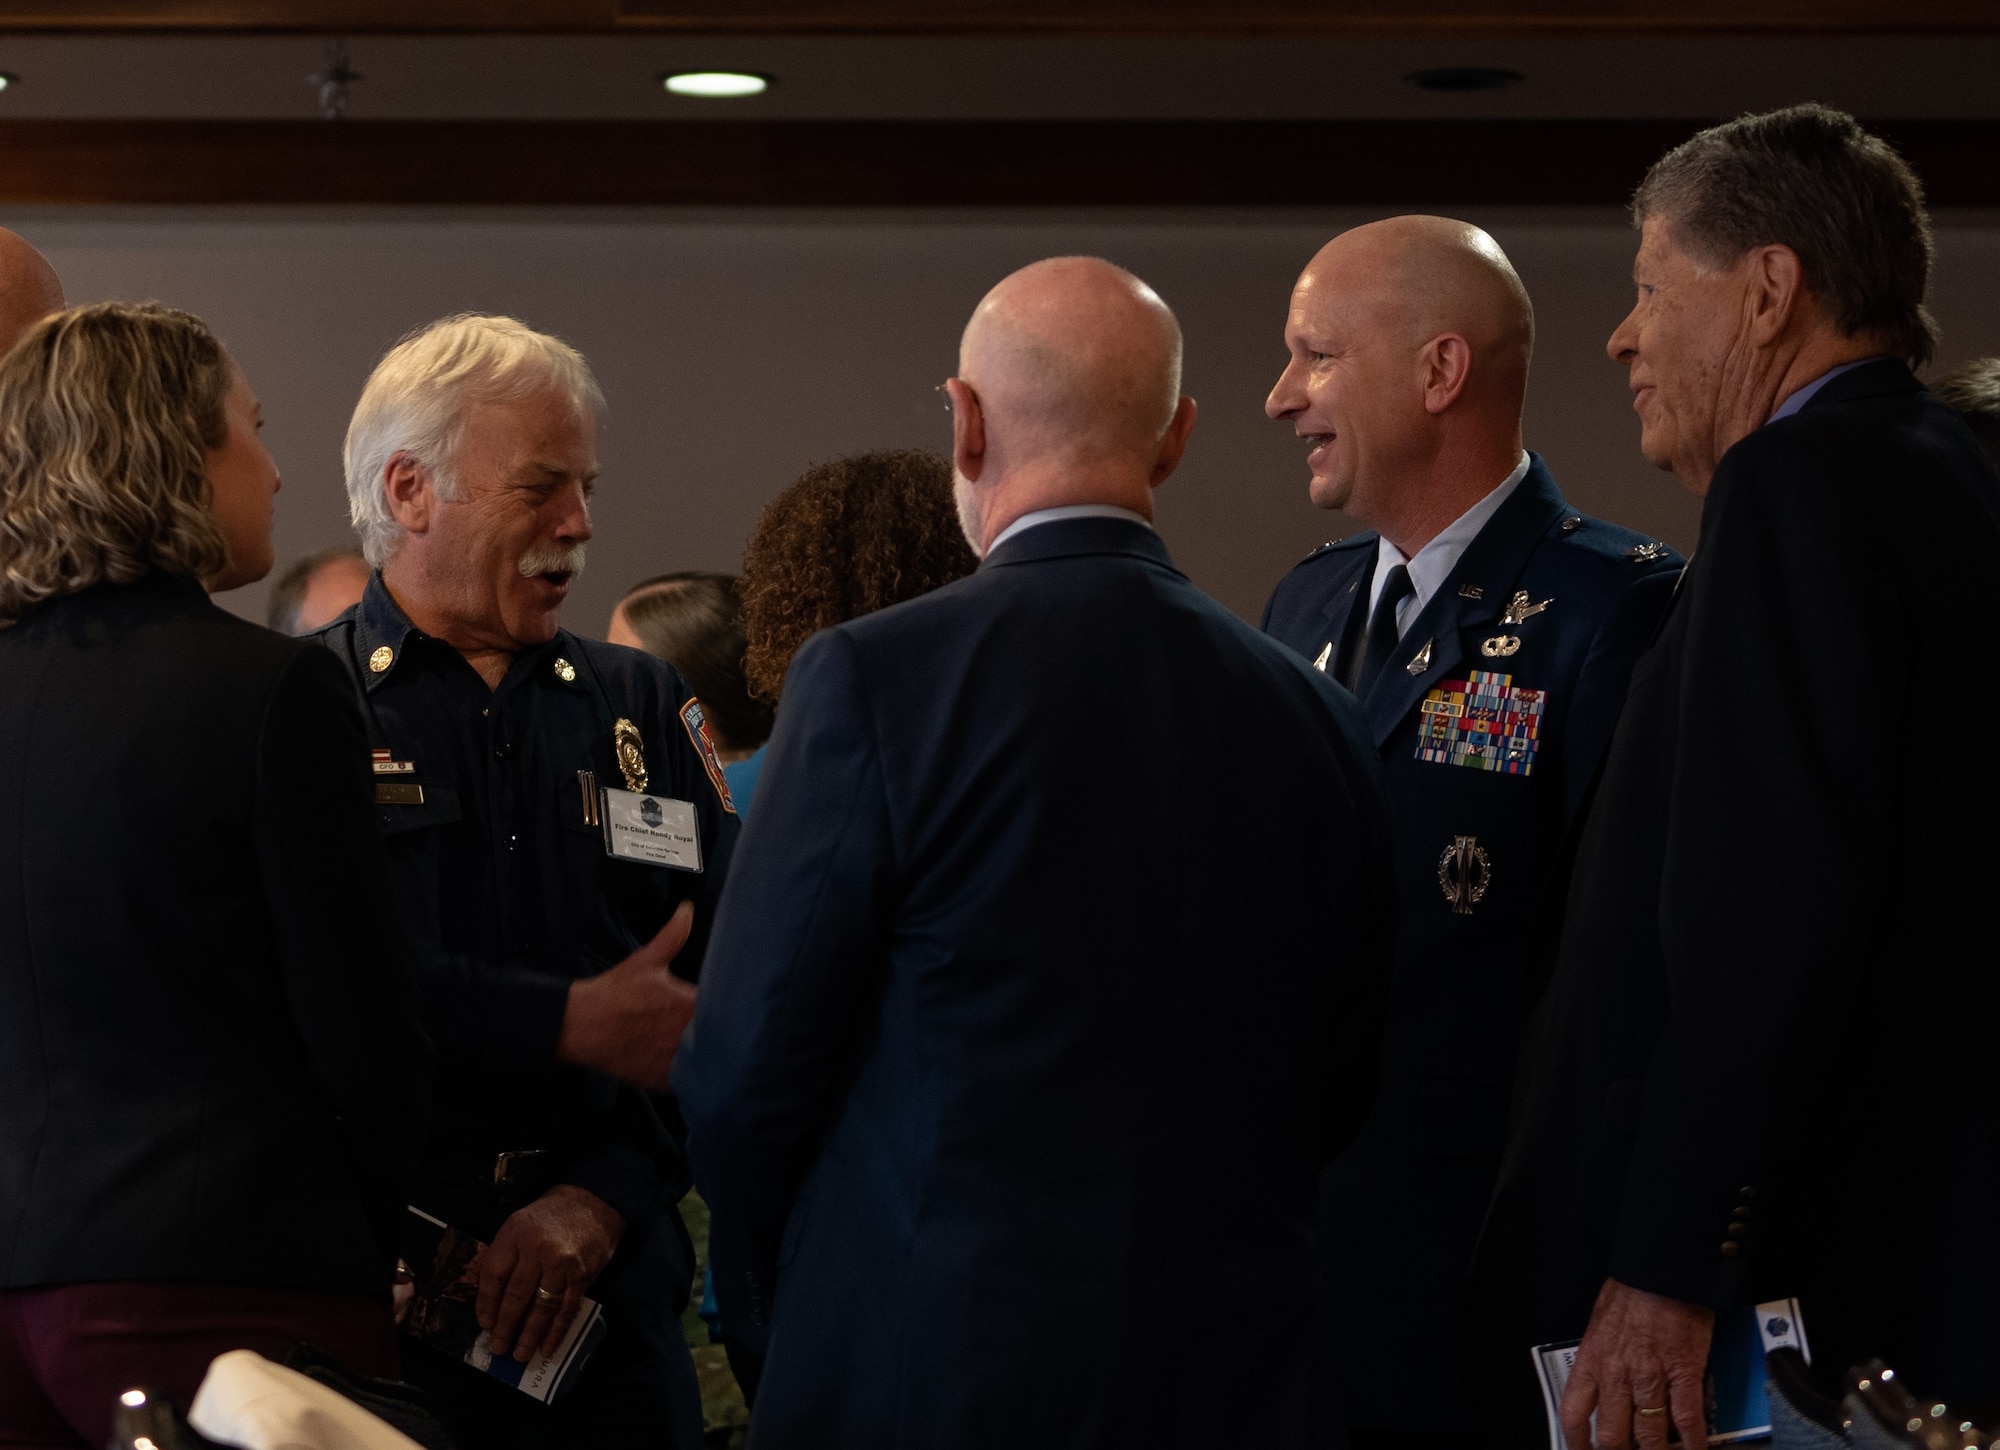 U.S. Space Force Col. David Hanson, Space Base Delta 1 commander, greets Mr. Randy Royal, City of Colorado Springs Fire Chief, before presenting the State of the Bases address at Peterson Space Force Base, Colorado, March 21, 2023. Due to the COVID-19 pandemic, the last State of the Bases address with in 2019. (U.S. Space Force photo by SrA. Jared Bunn)